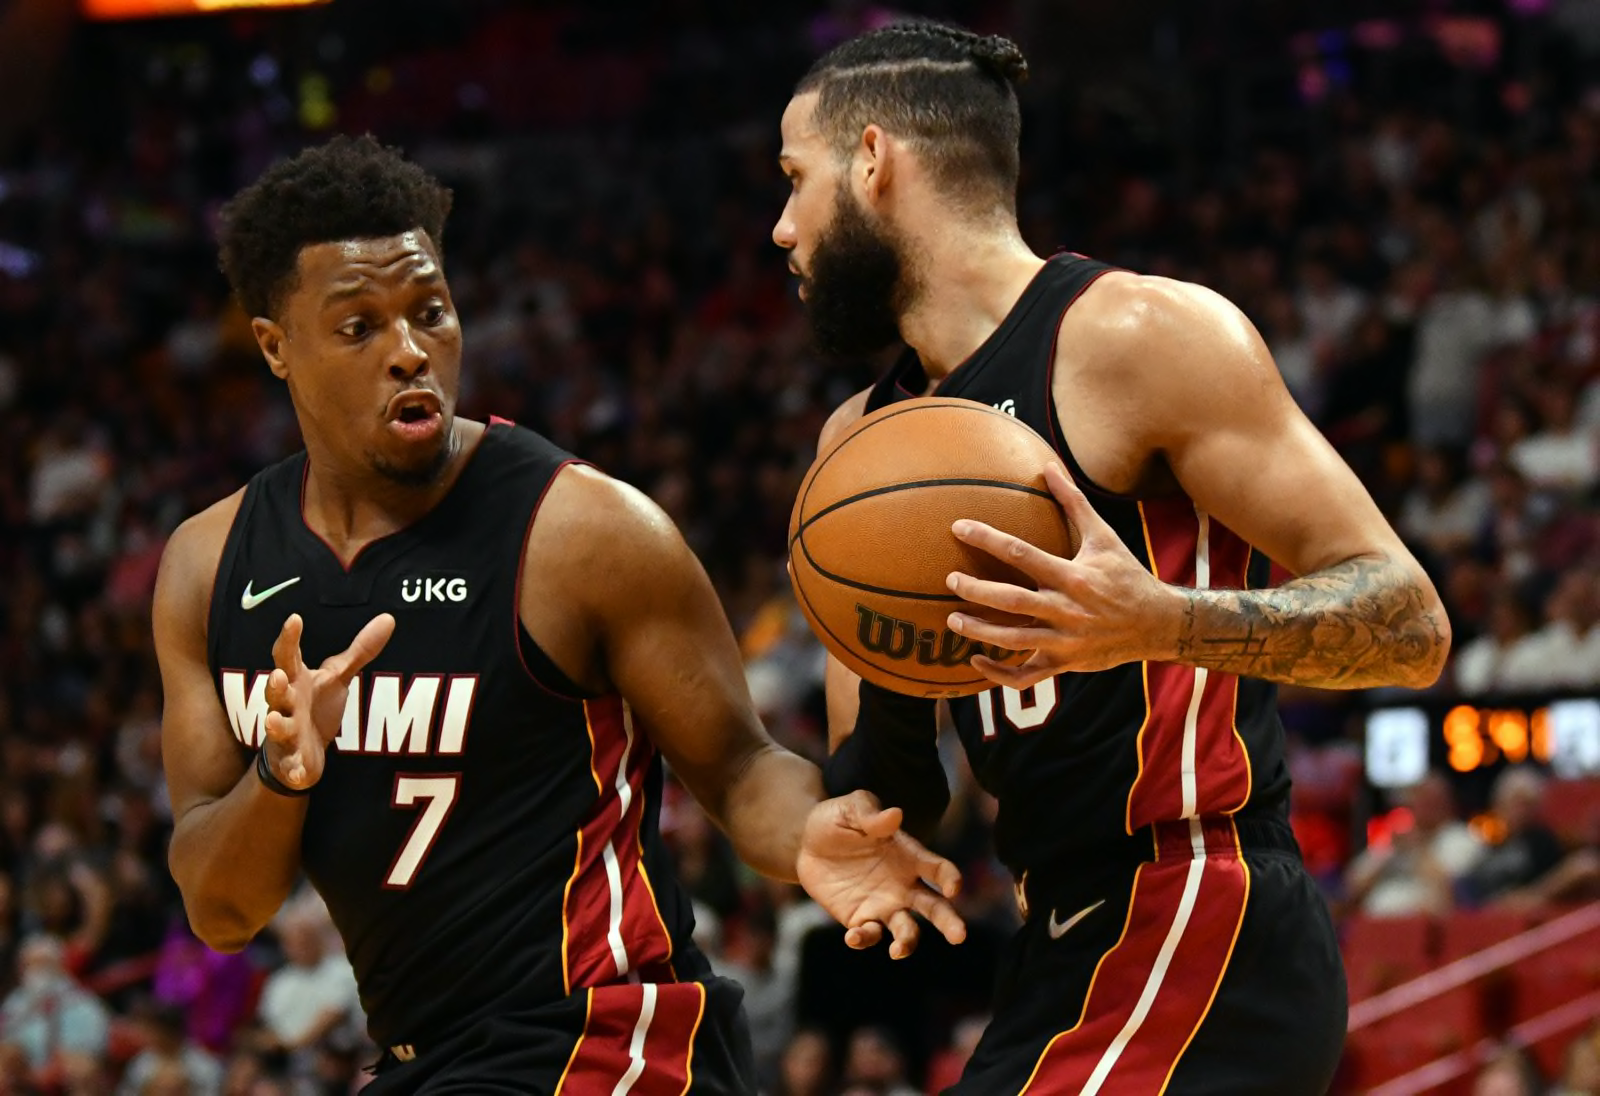 Miami Heat's Kyle Lowry is older, wiser and still determined to